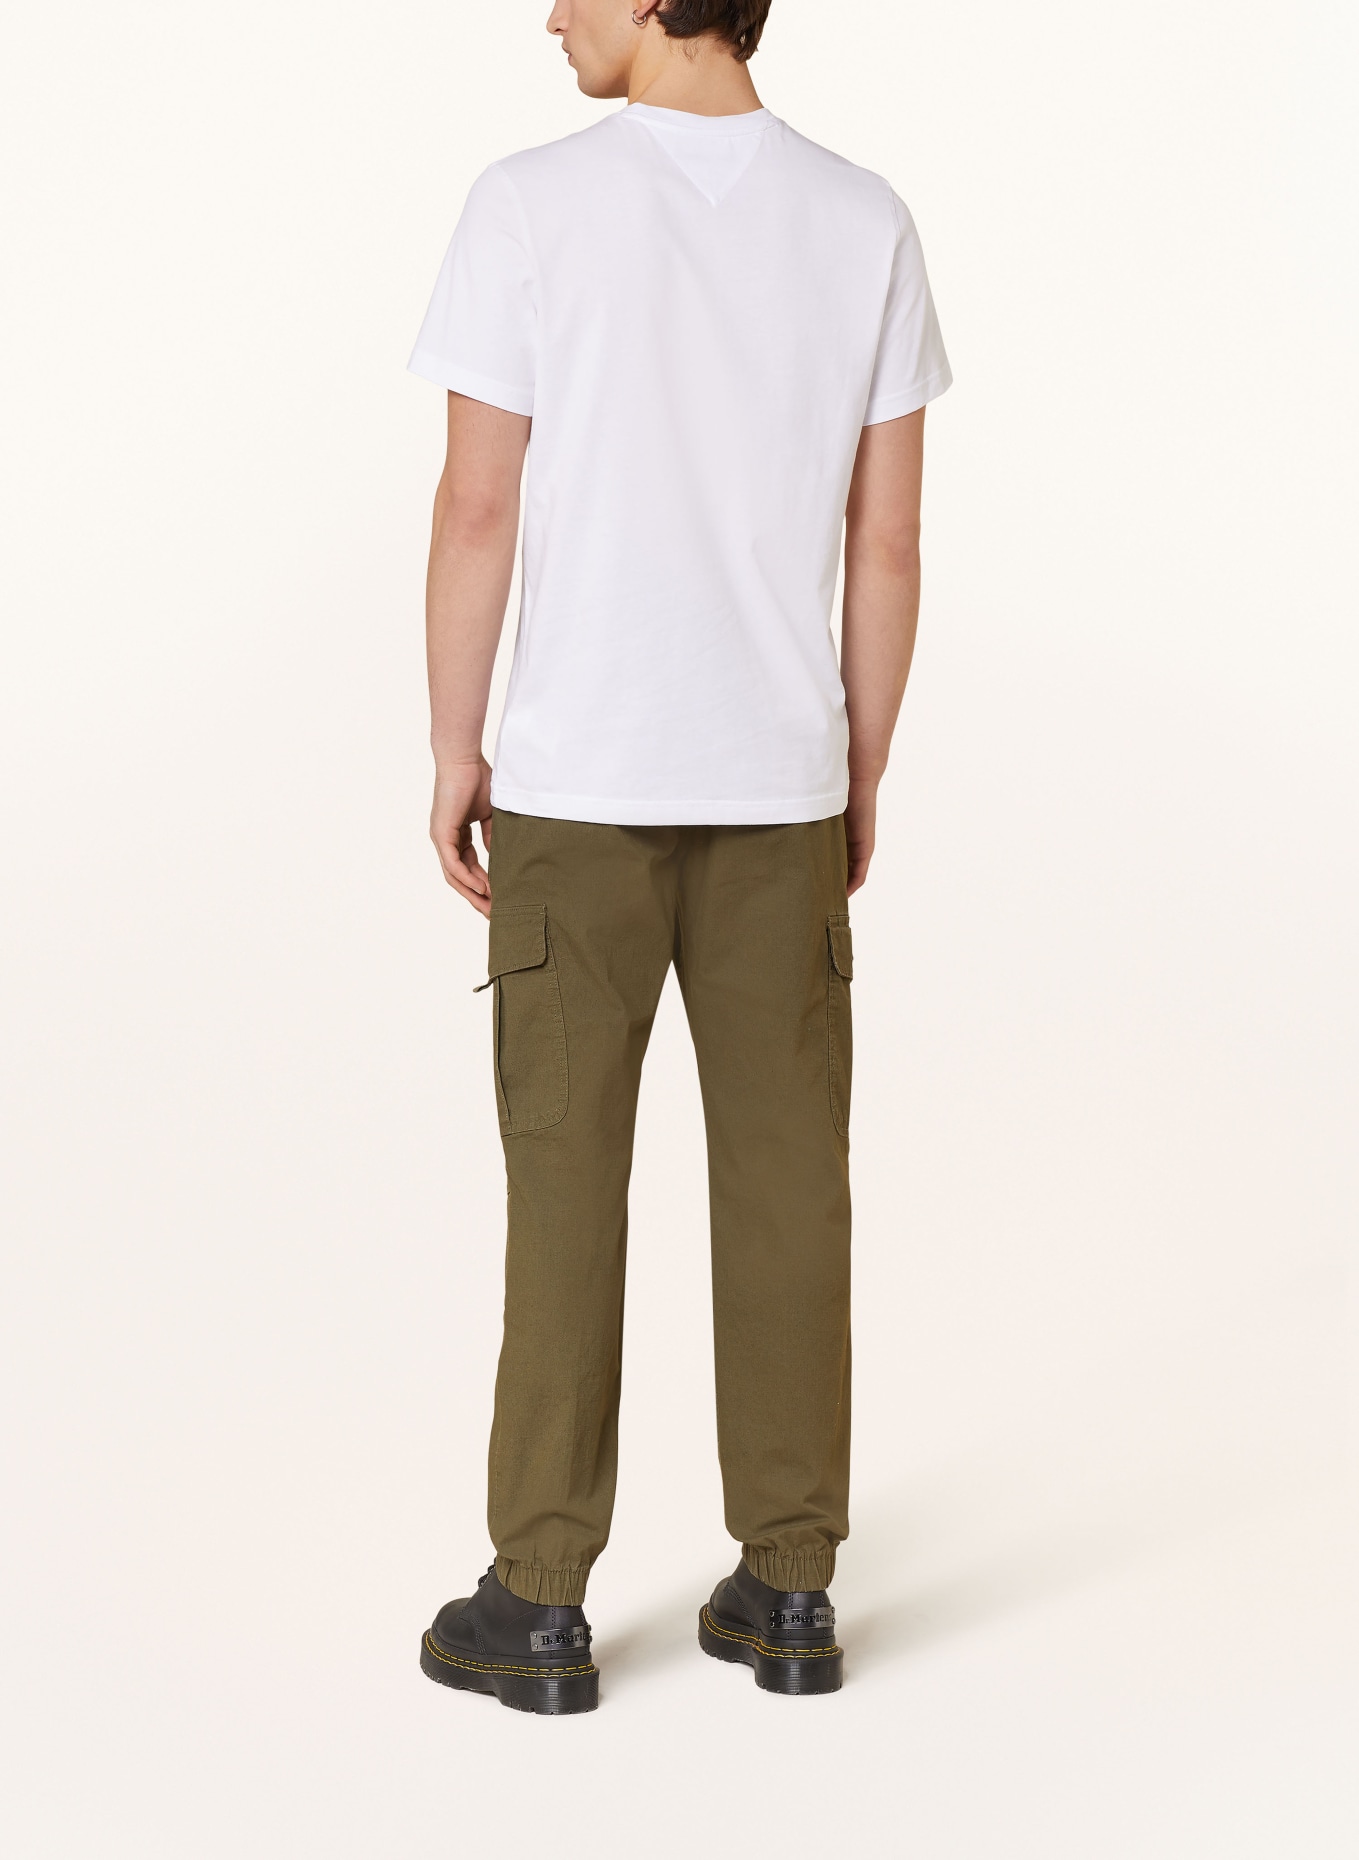 TOMMY JEANS T-shirt, Color: WHITE (Image 3)